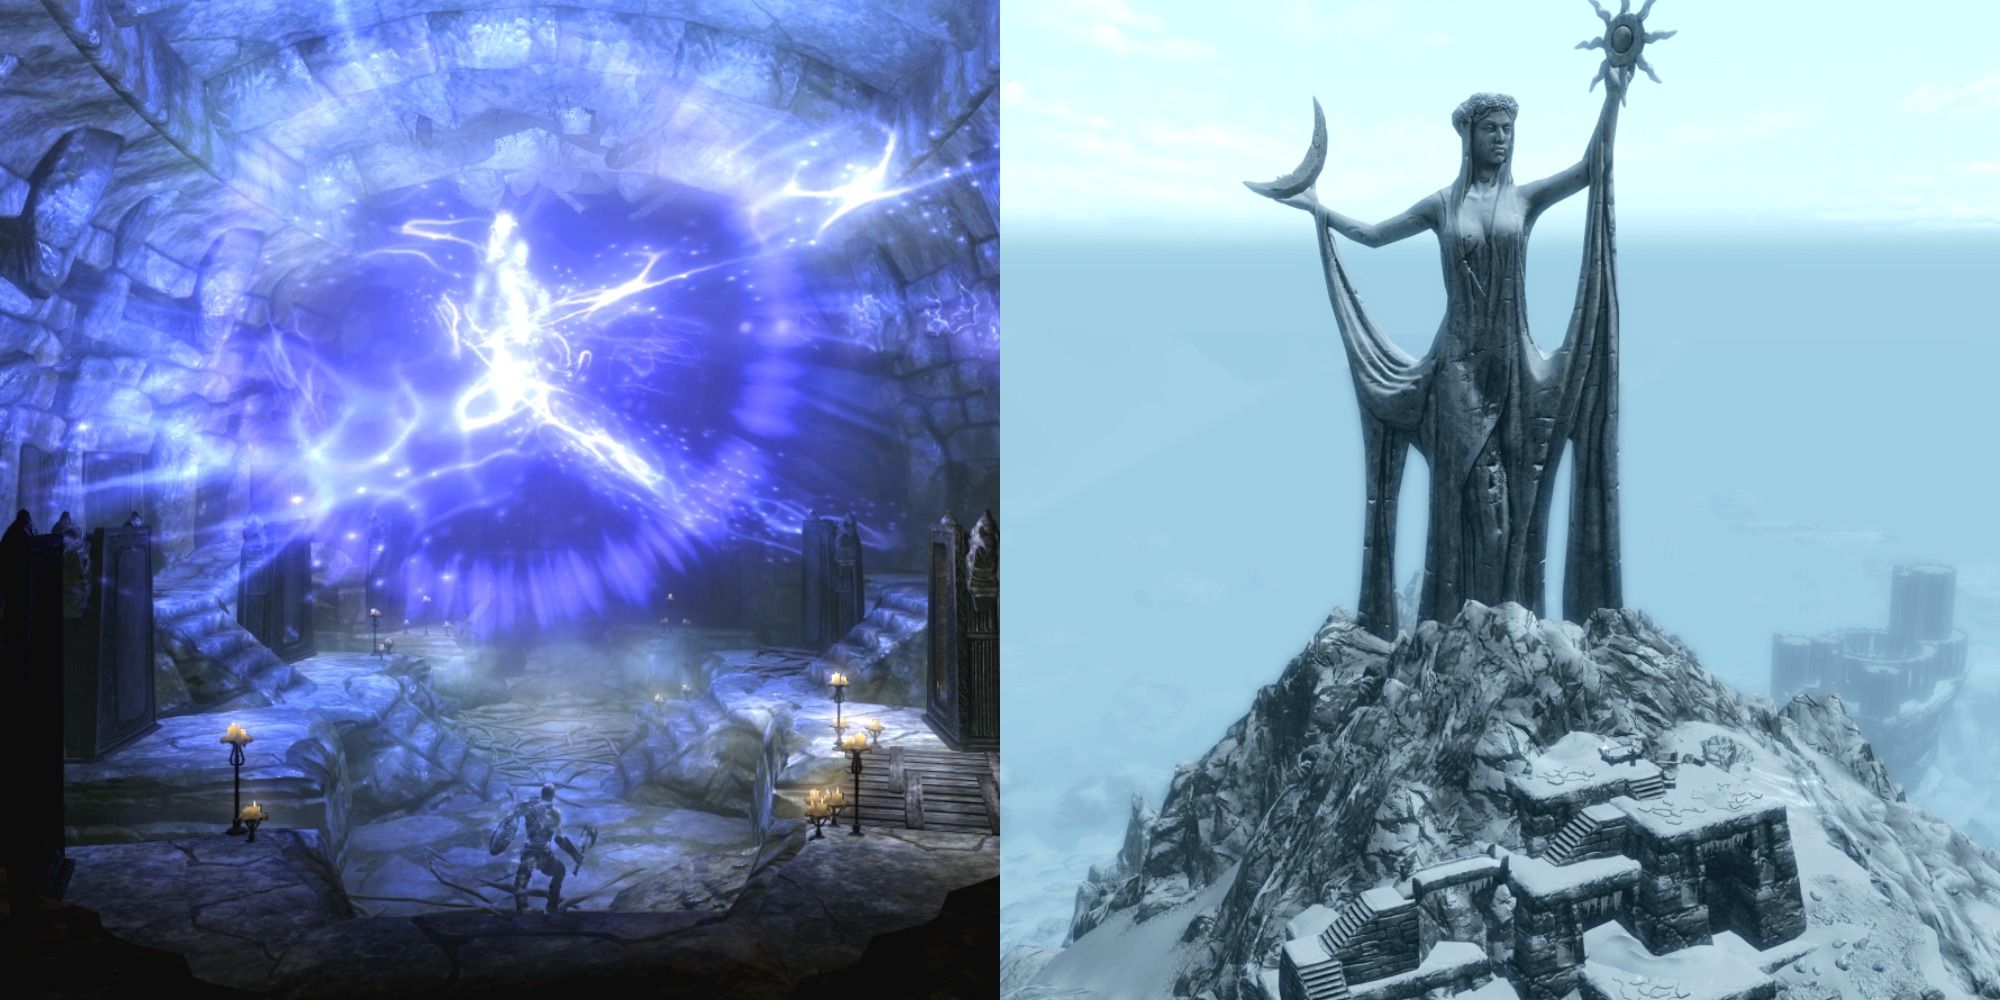 Split image showing an explosion of blue power and a statue in Elder Scrolls: Skyrim